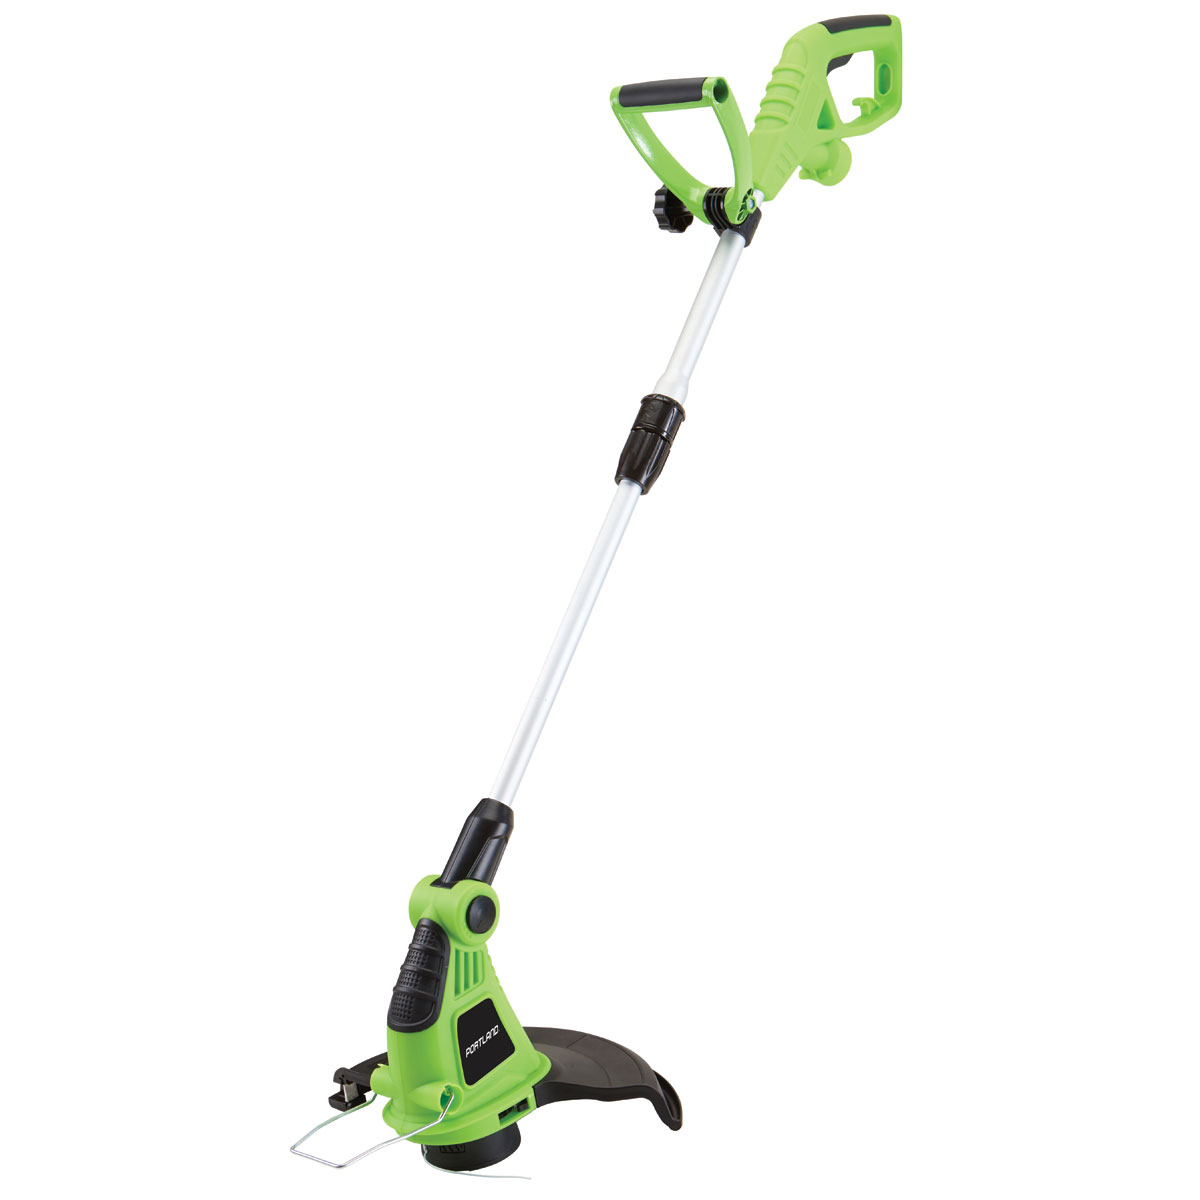 harbor freight electric weed wacker